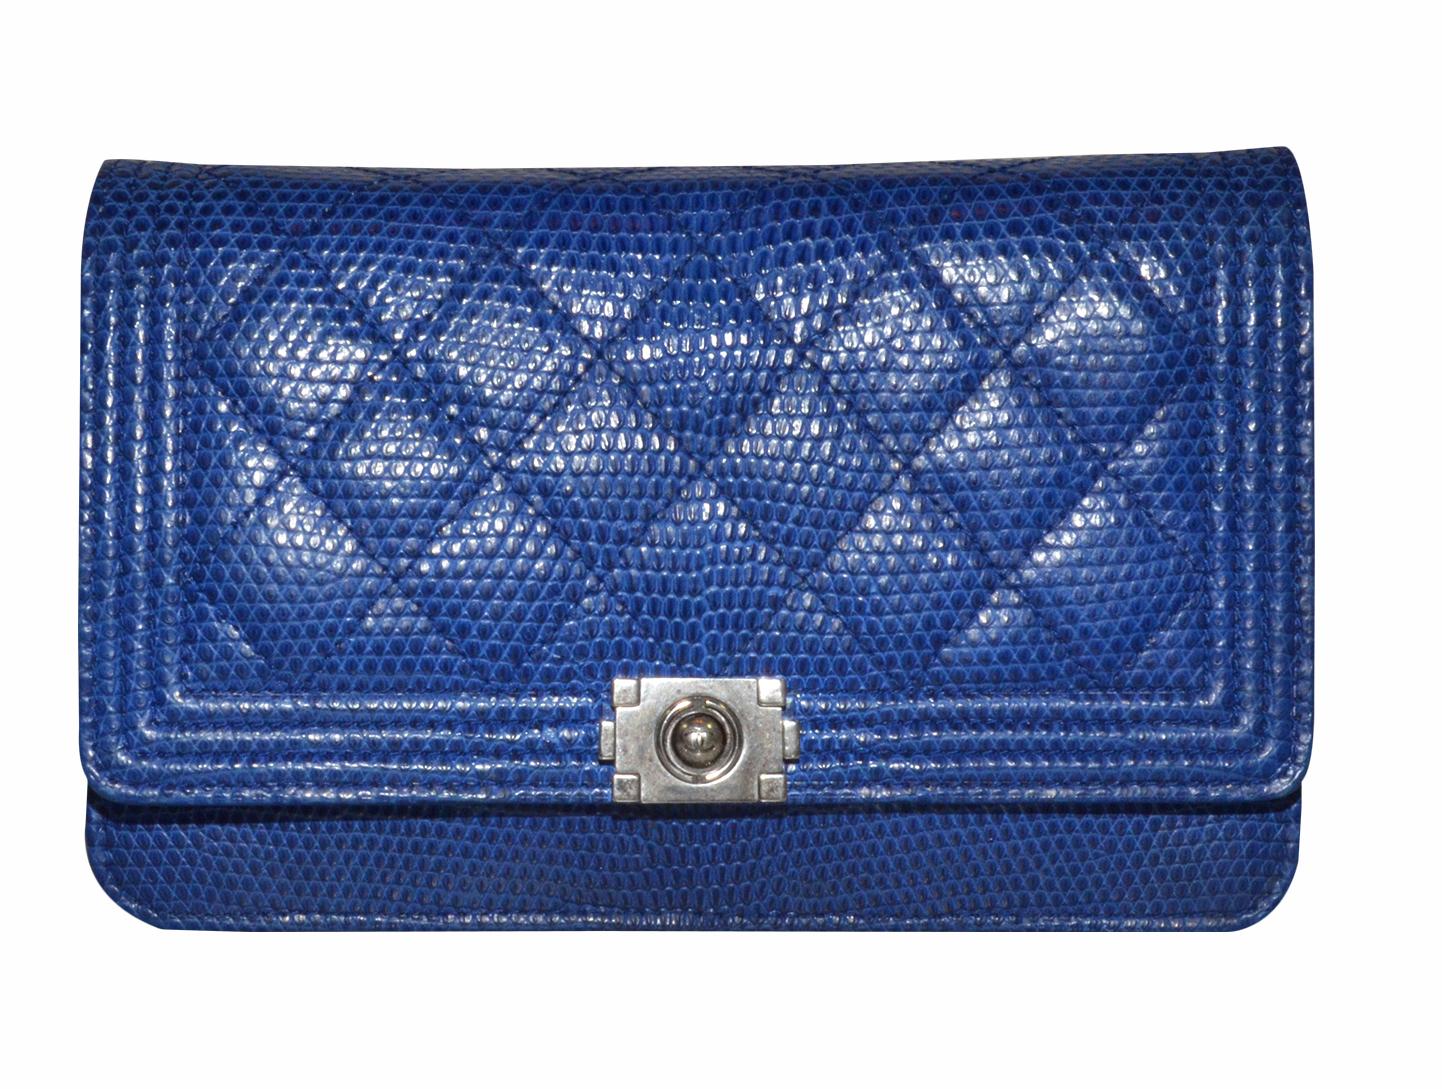 Chanel wallet on a chain is featured in blue lizard skin with a diamond quilt and gunmetal hardware. Bag has a snap closure and is fully lined. Interior offers a slip pocket, 2 zippered pockets, and an open compartment with card slots. Dustbag is